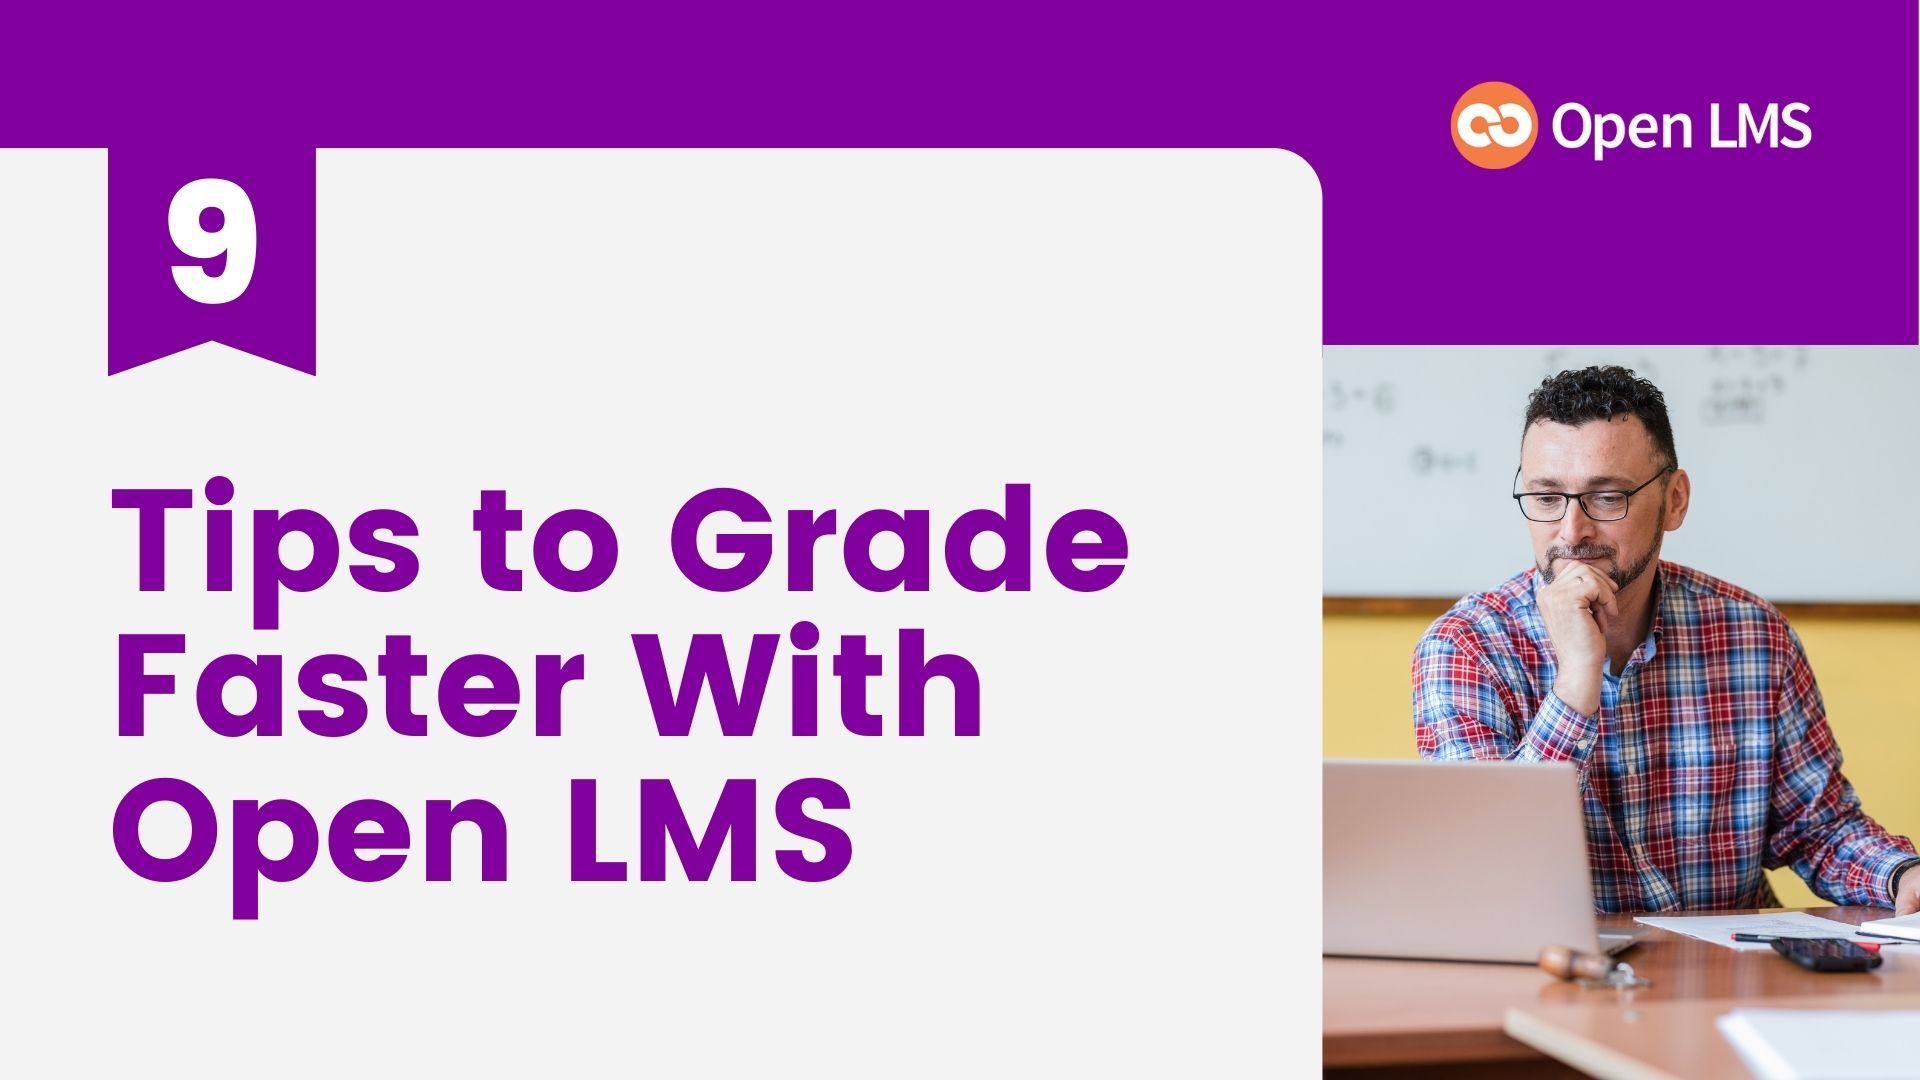 9 Tips to Grade Faster With Open LMS